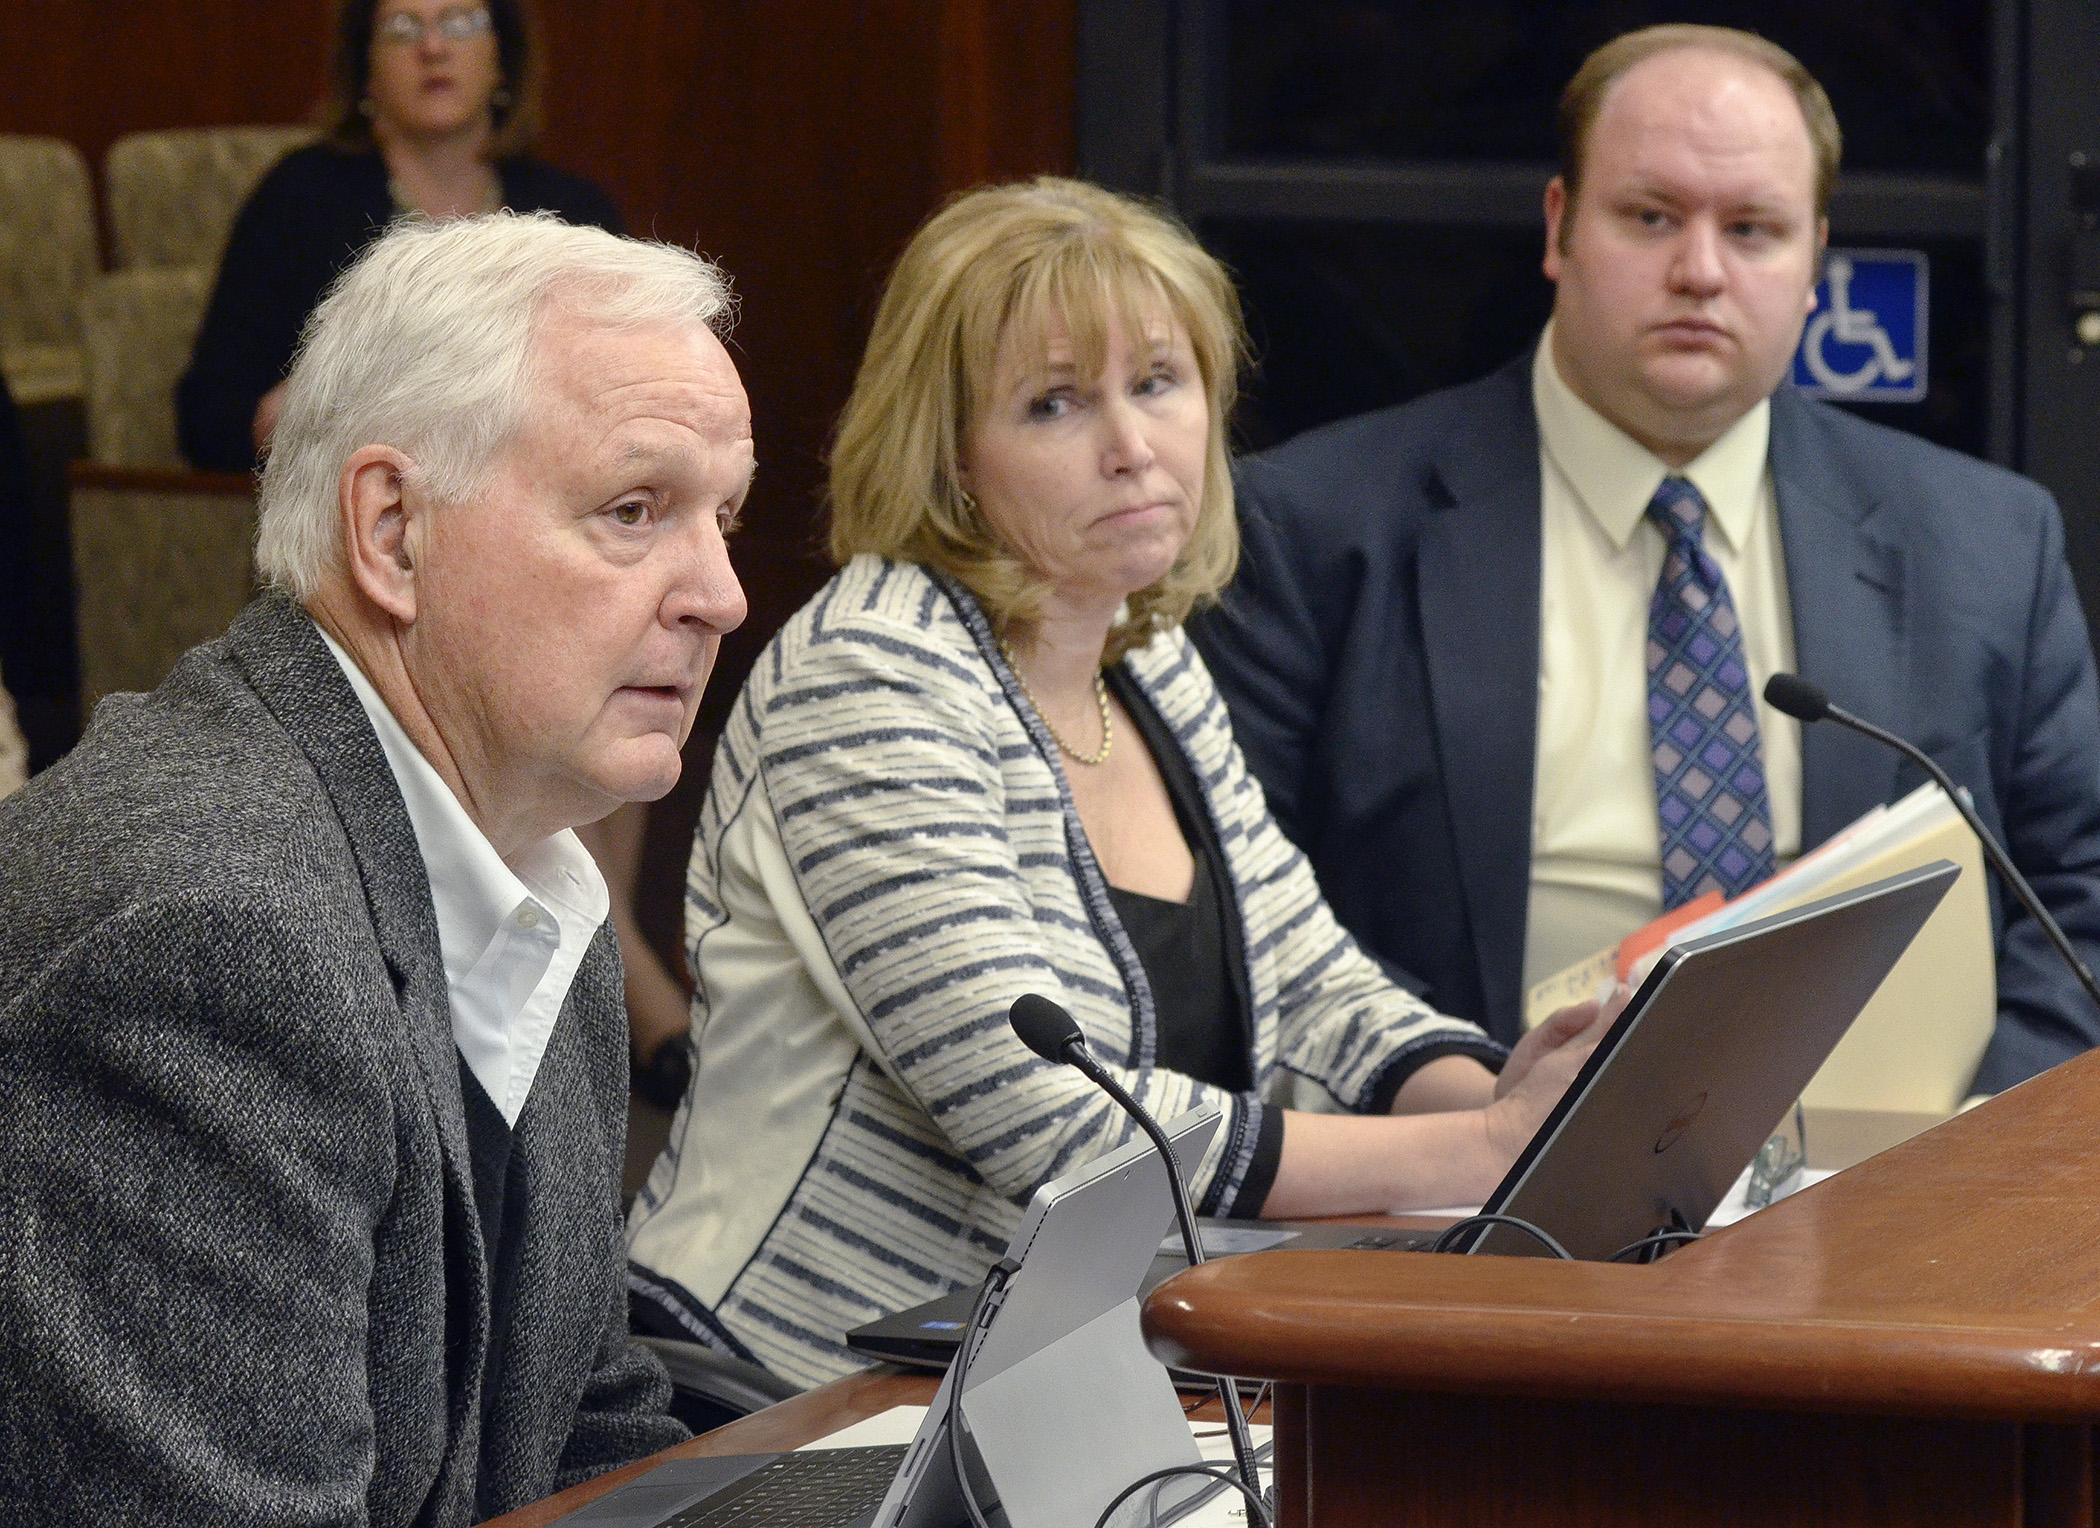 Dr. Kent Kephart, president of the Twin Cities Medical Society, from left, and Dr. Lisa Mattson, the society’s past president, testify for a bill sponsored by Rep. Joe Schomacker to establish an advanced care planning grant program. Photo by Andrew VonBank